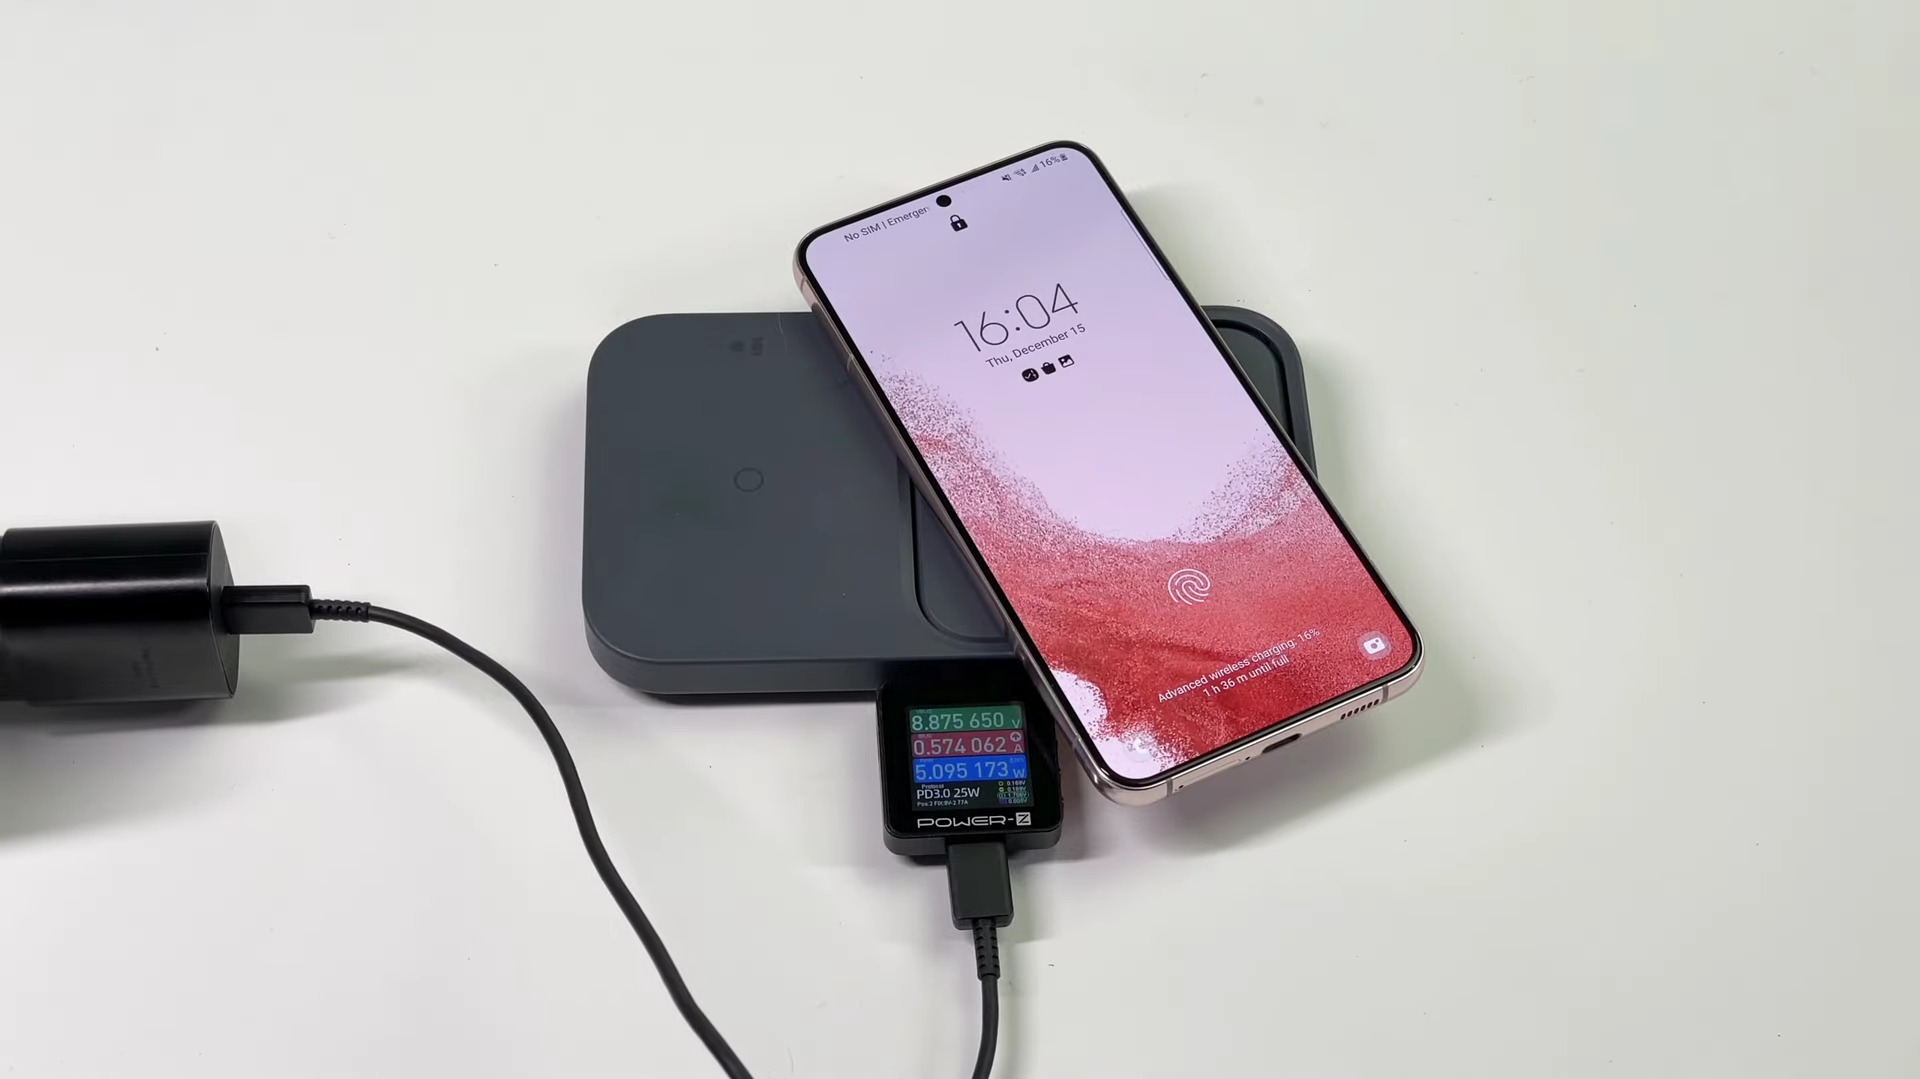 Why Is Wireless Charging Rarely Used?-Chargerlab